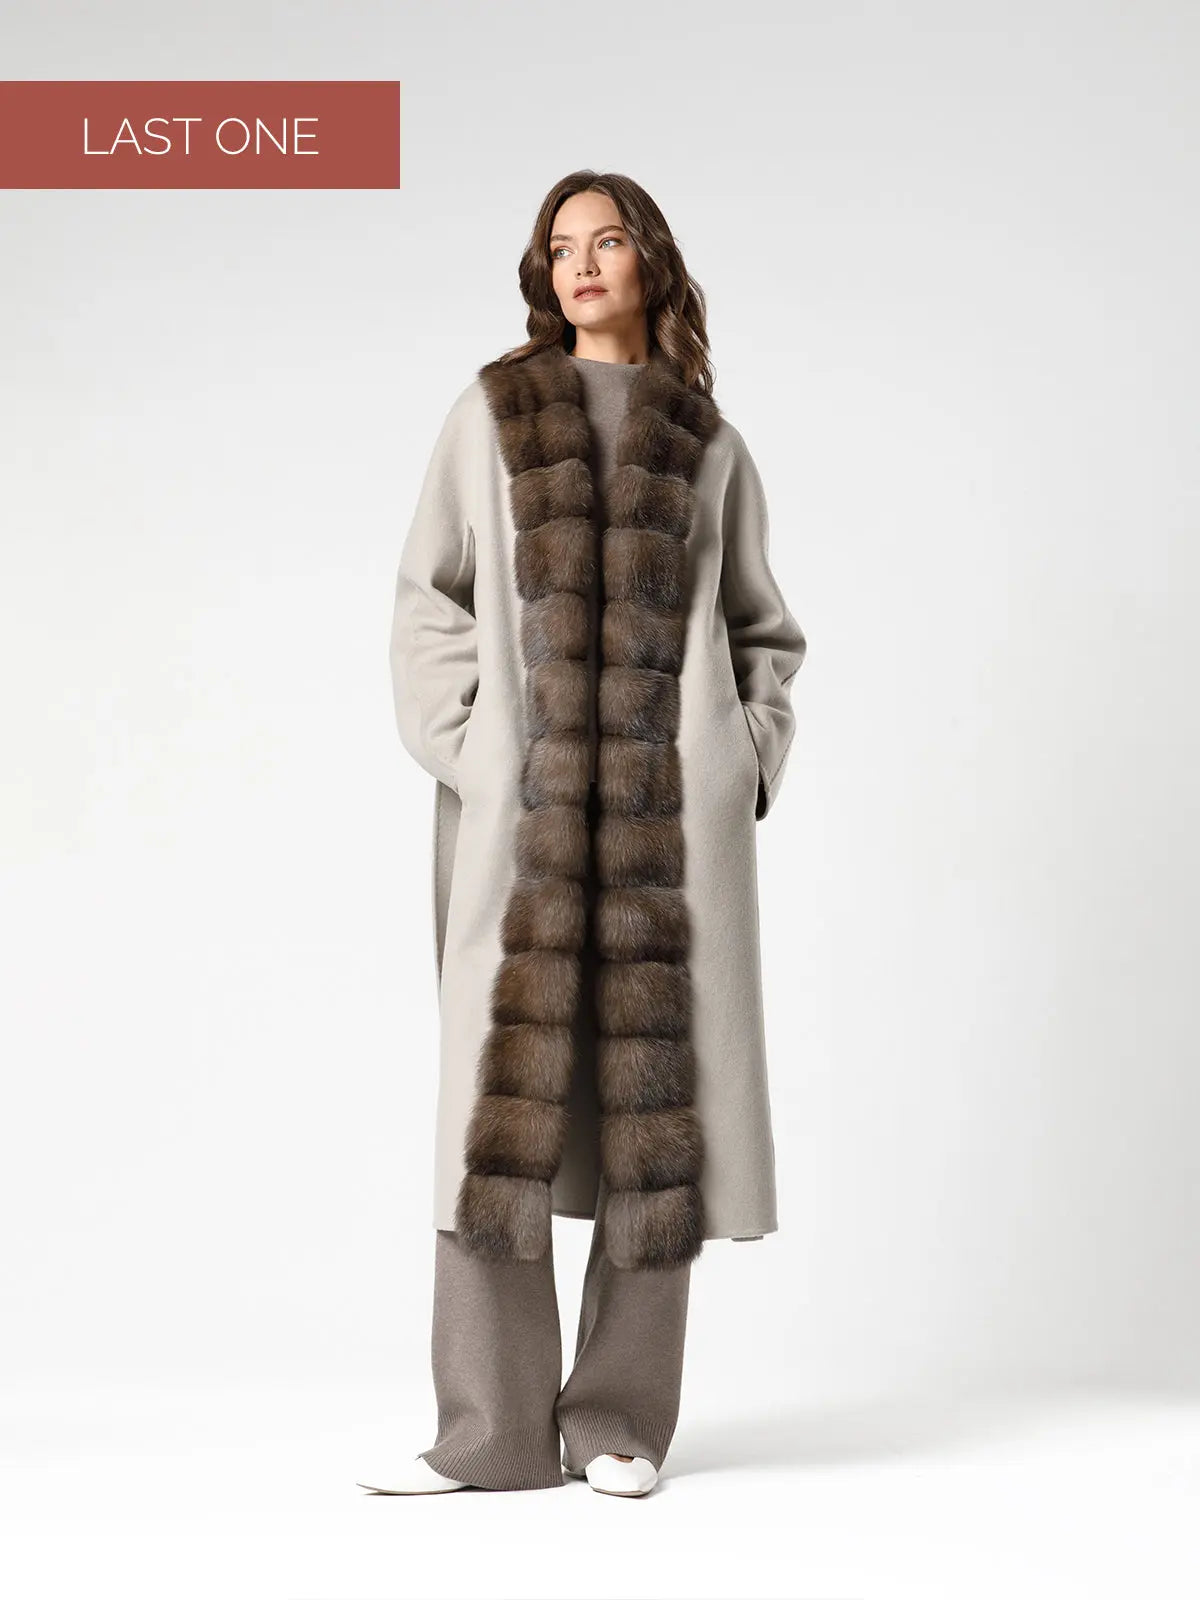 Olive cashmere coat with sable fur trim from Barguzin